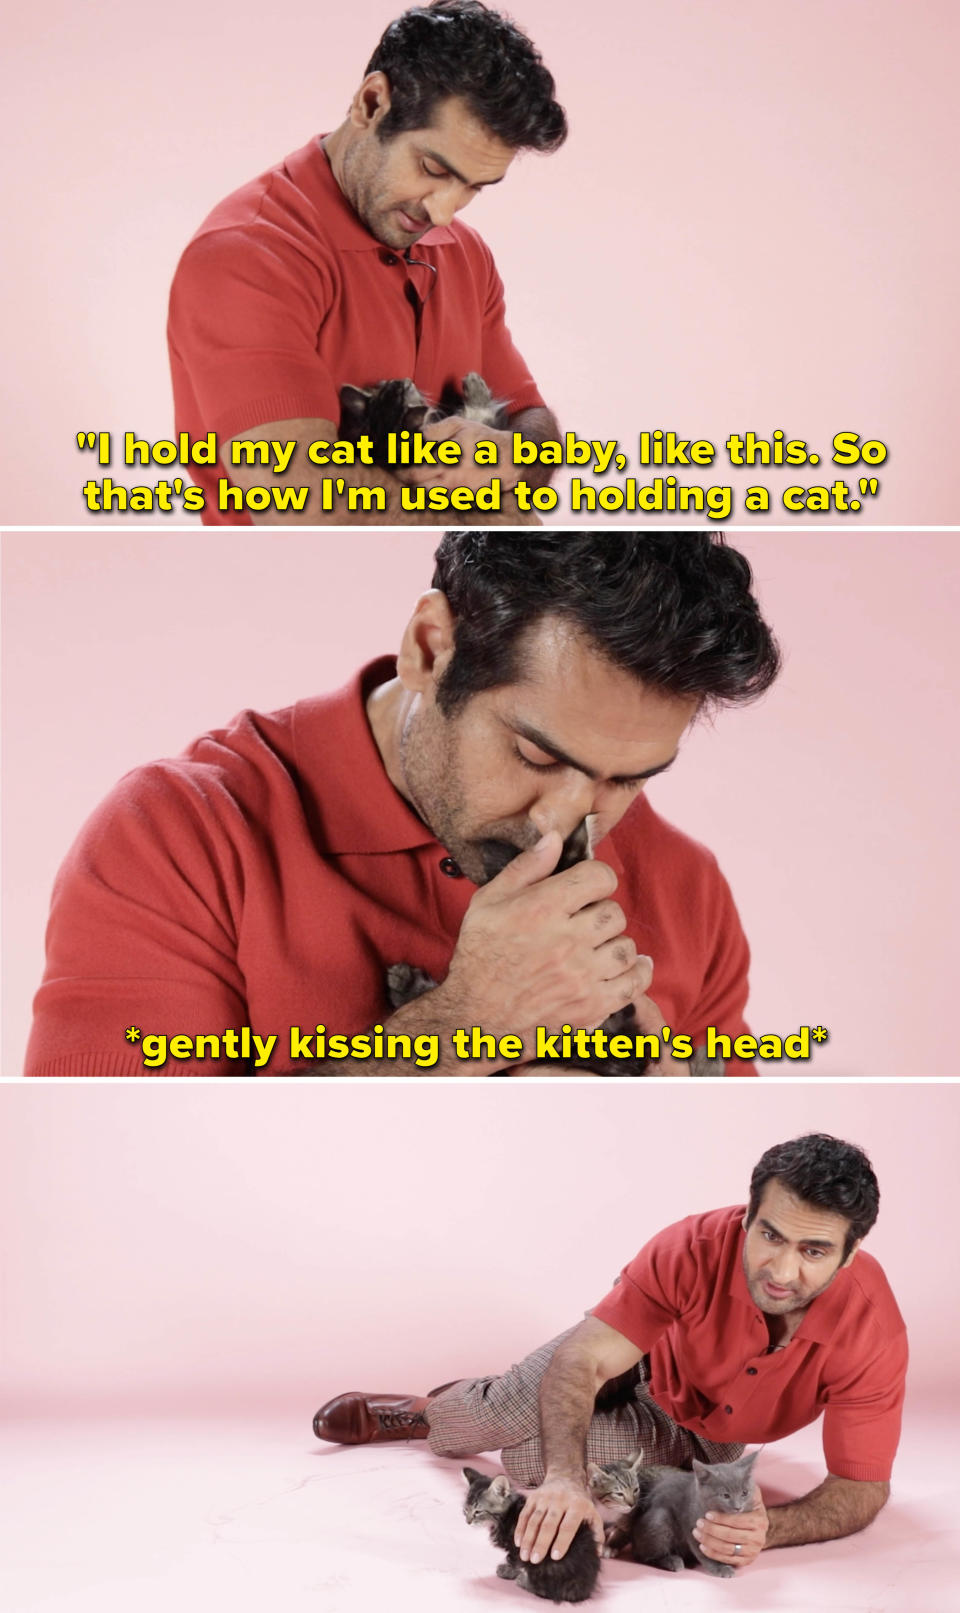 Kumail kissing a kitten's head and saying "I hold my cat like a baby, like this, so that's how I'm used to holding a cat"